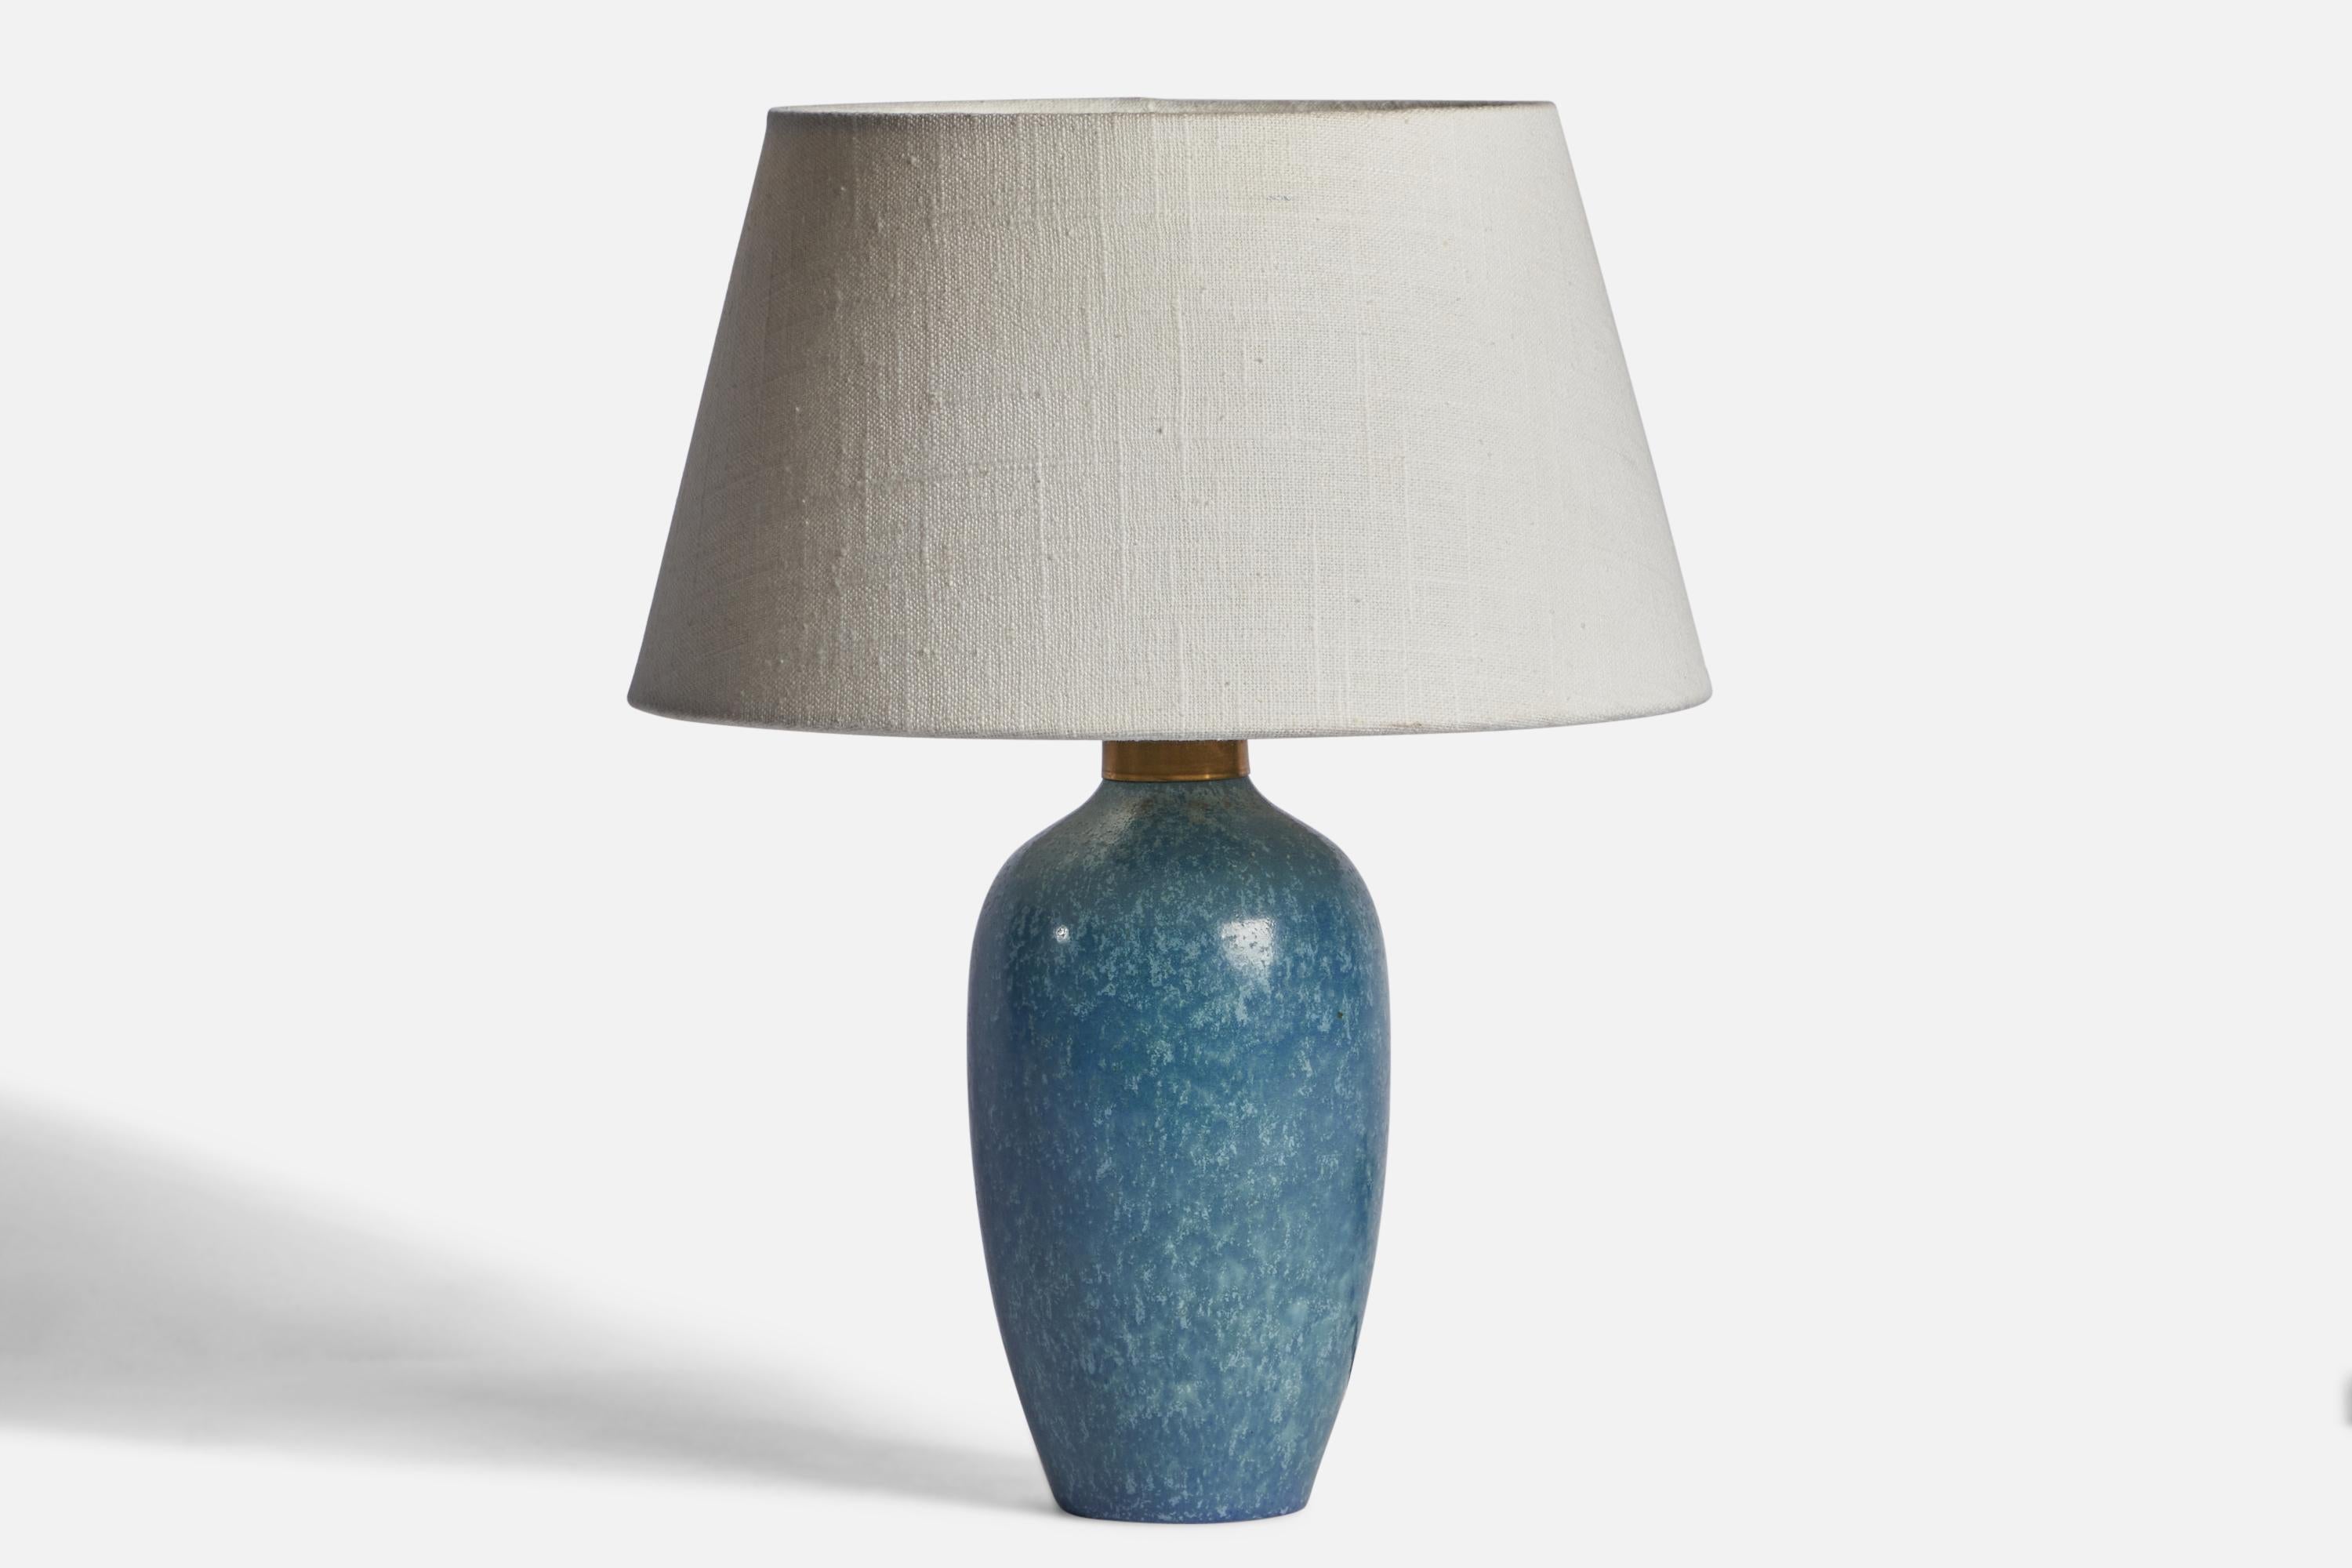 
A blue-glazed stoneware and brass table lamp designed by Carl-Harry Stålhane and produced by Rörstrand, Sweden, 1950s.
Dimensions of Lamp (inches): 9.75” H x 3.90” Diameter
Dimensions of Shade (inches): 7” Top Diameter x 10” Bottom Diameter x 5.5”